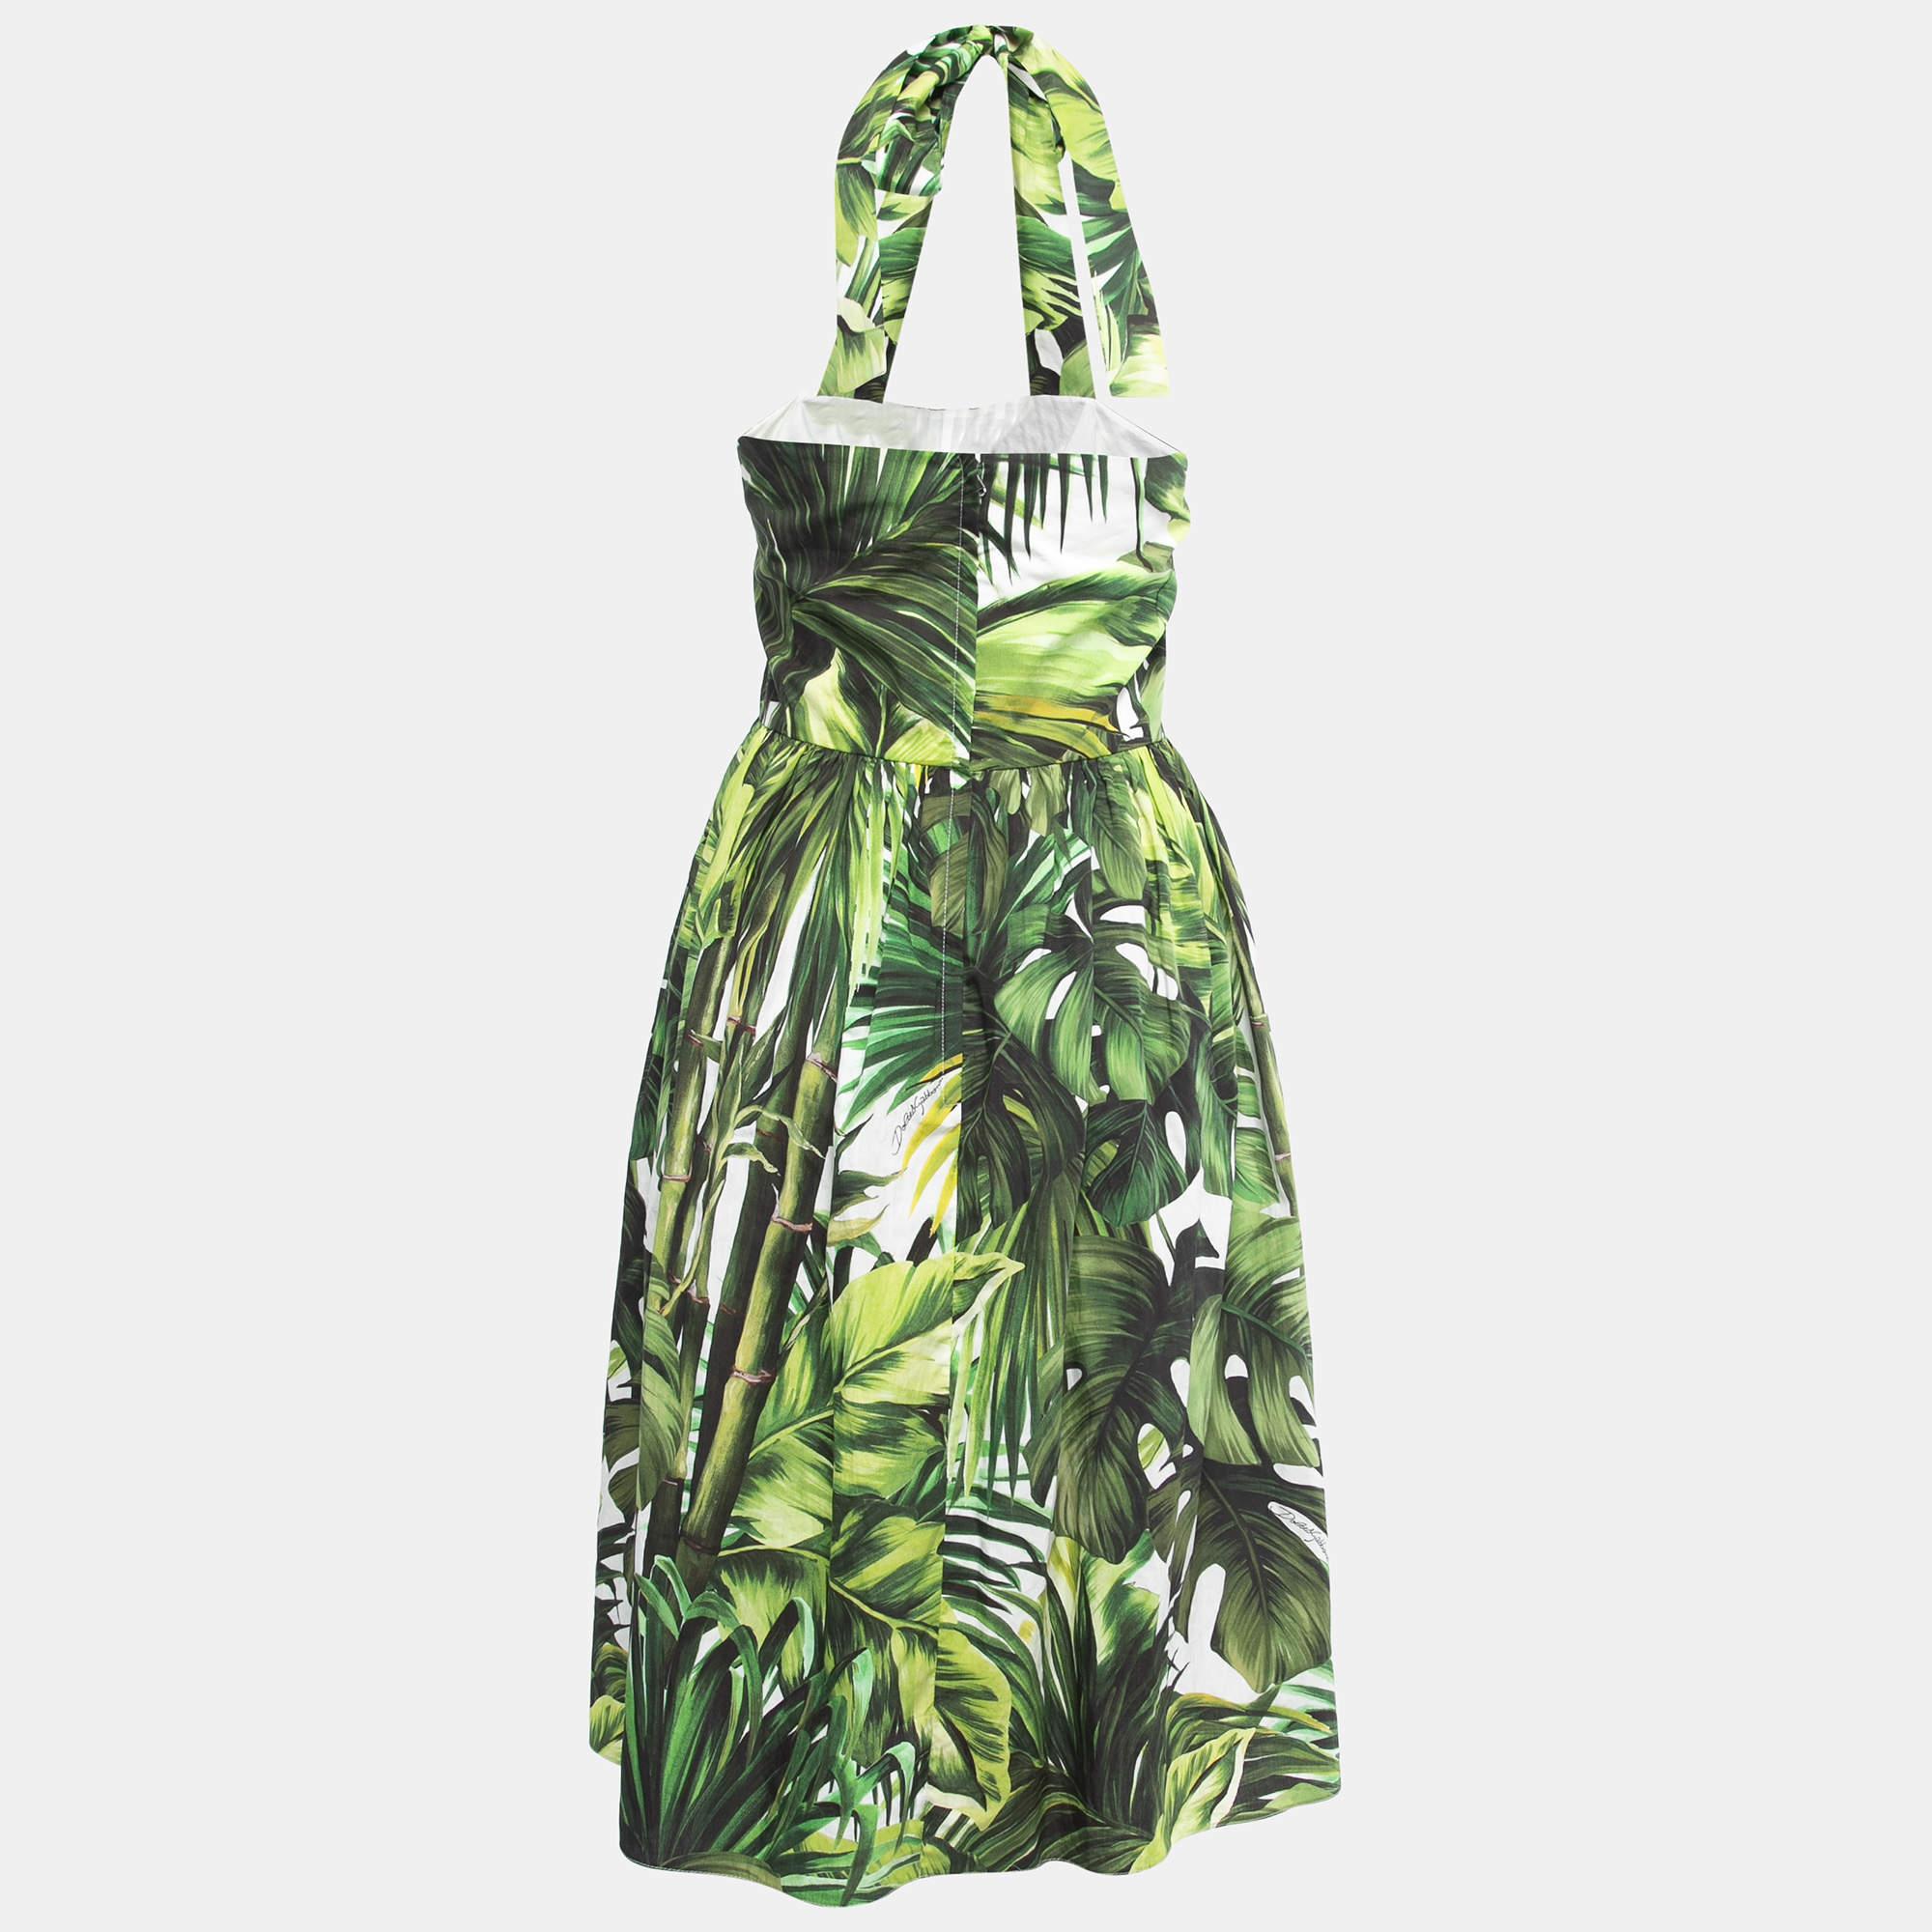 The Dolce & Gabbana dress is a perfect choice for summer with its vibrant and blooming floral print. The dress features a flattering silhouette, lightweight fabric, and a playful design that exudes feminine charm. Embrace the season's joy and